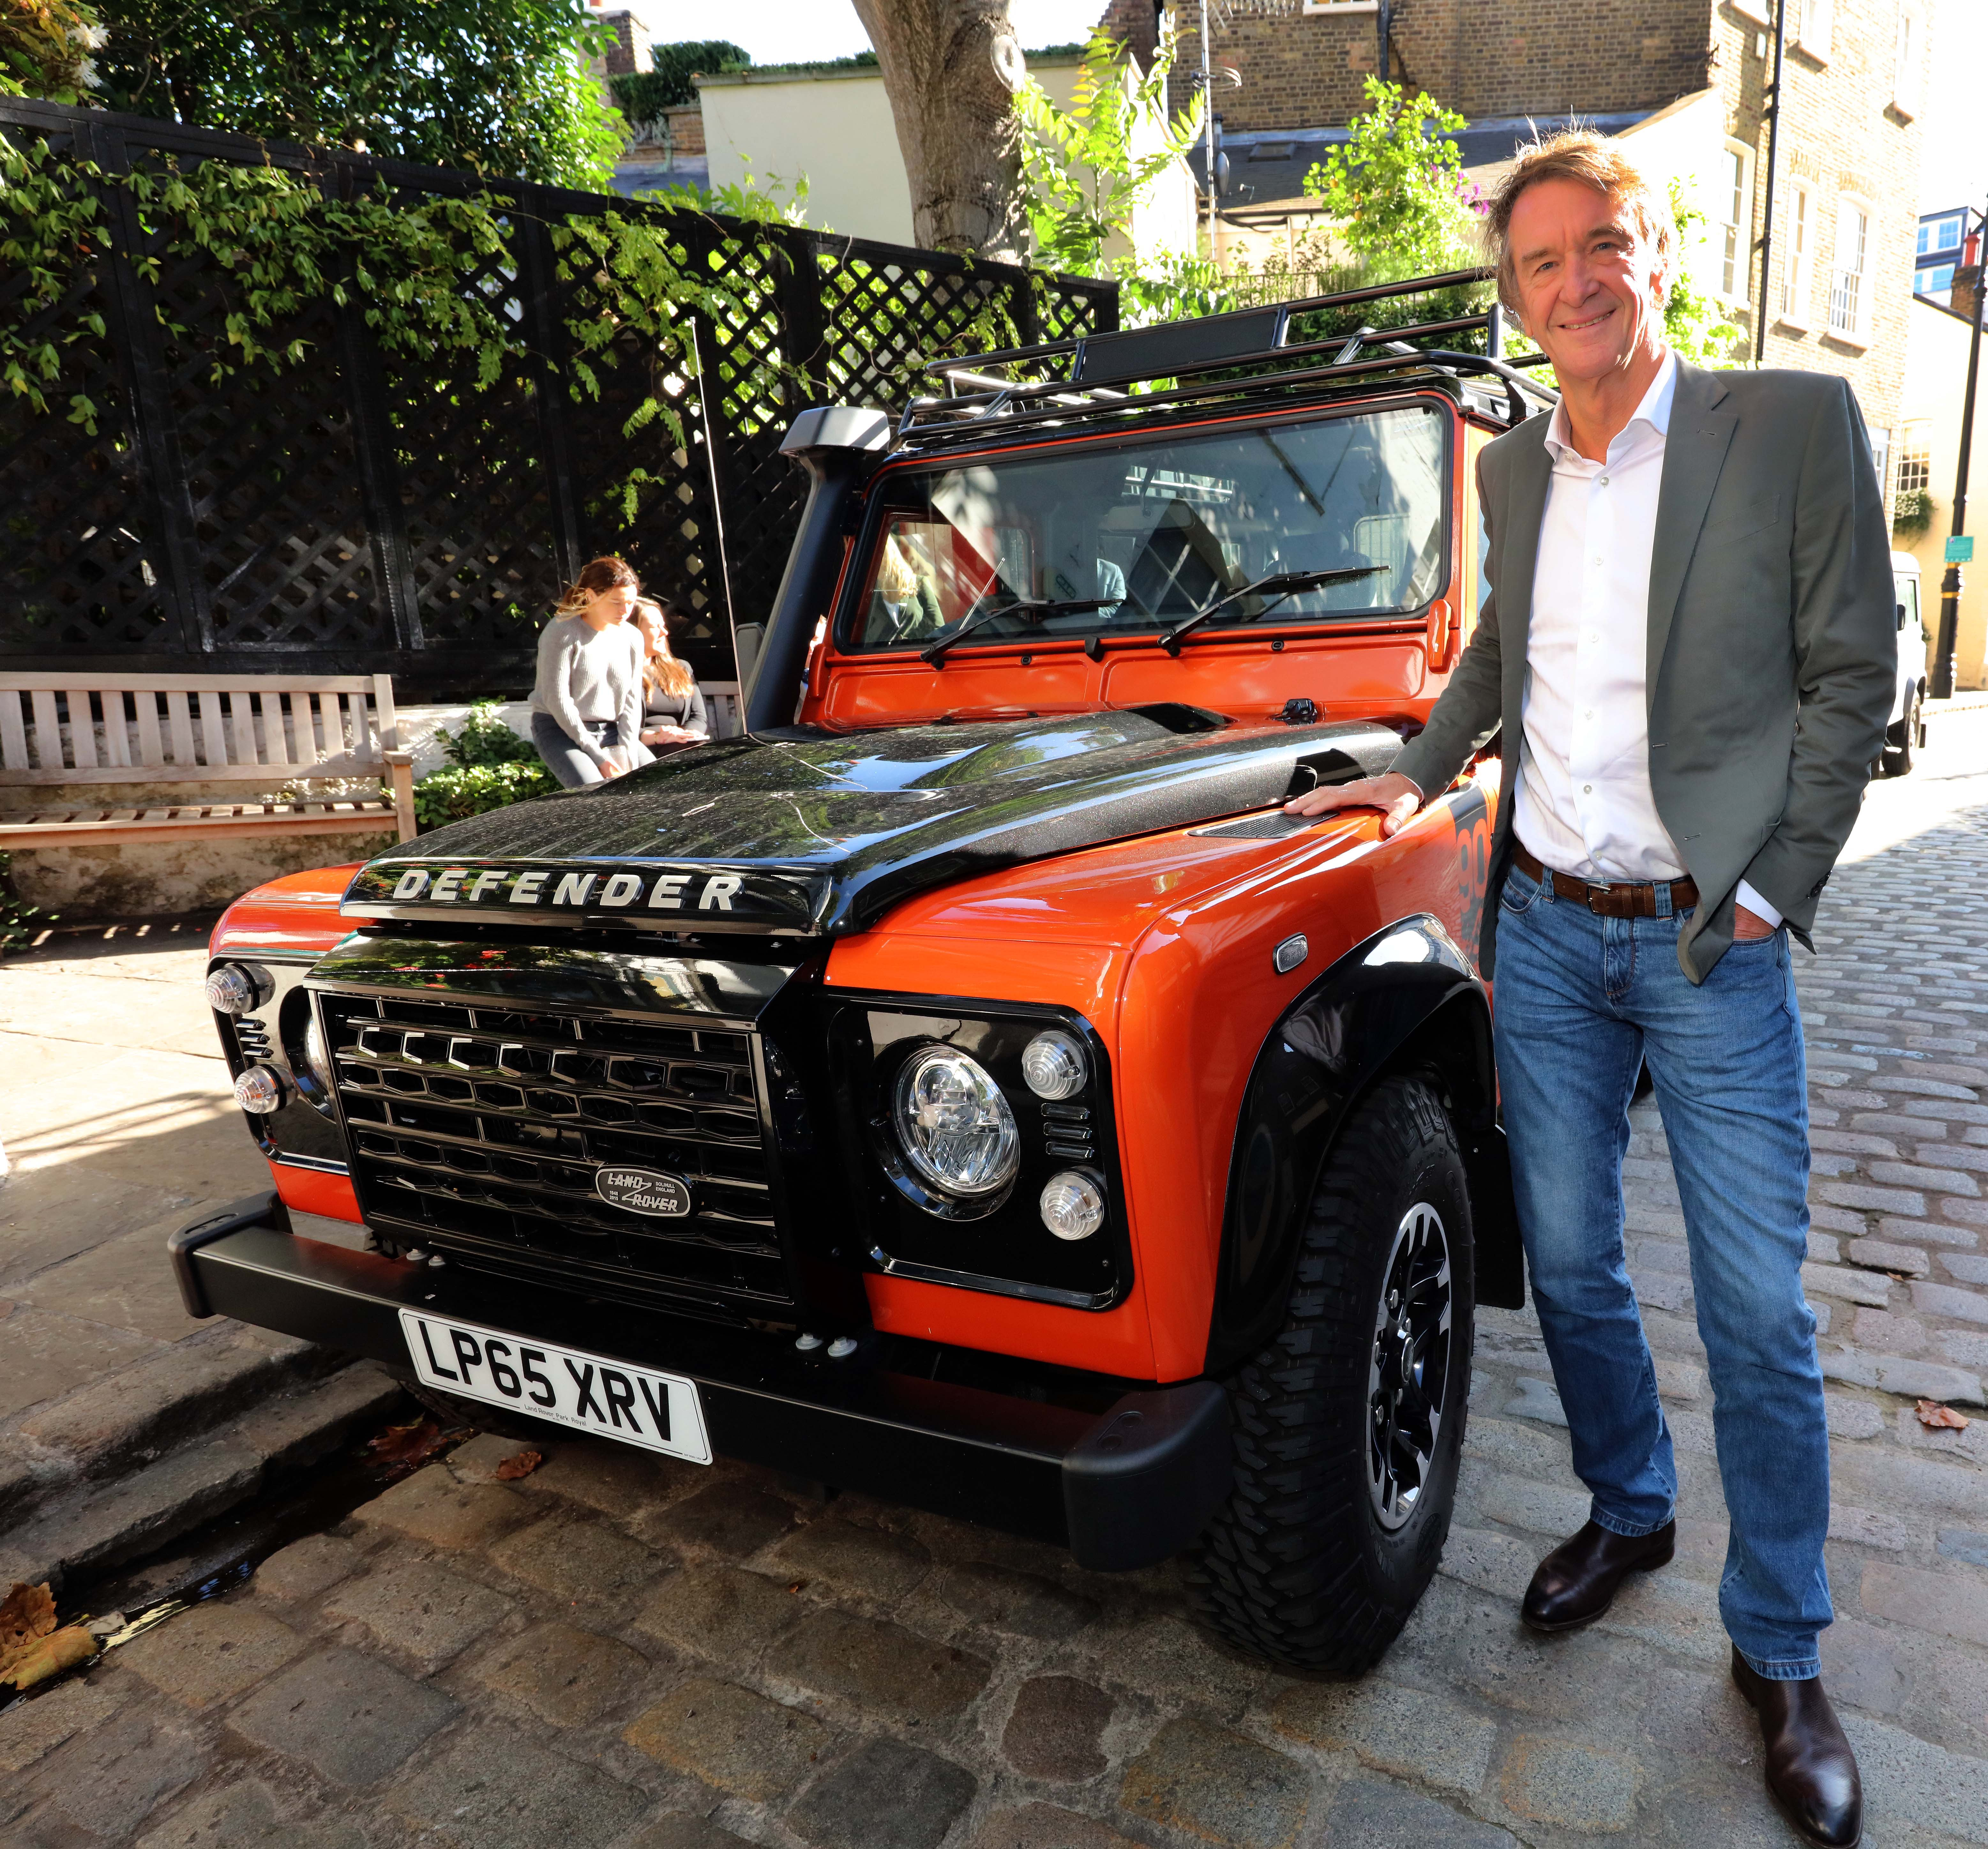 Jim Ratcliffe has halted plans for his latest electric sports car with his Ineos Group